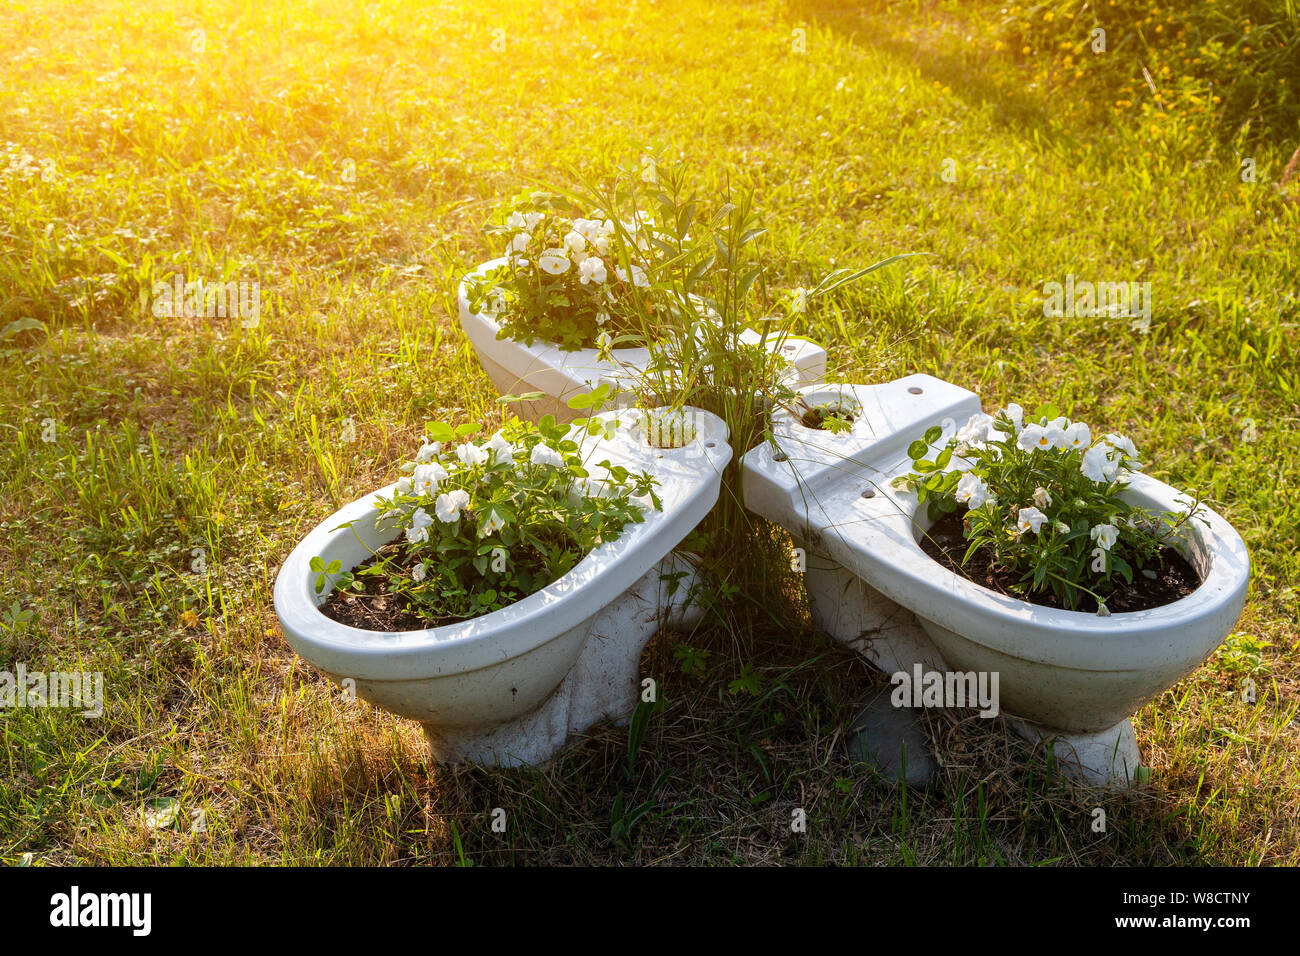 Close-up ofwhite toilets in white flowered petunias like pots and decorations for the garden on a garden stone on a green grass background on a warm s Stock Photo